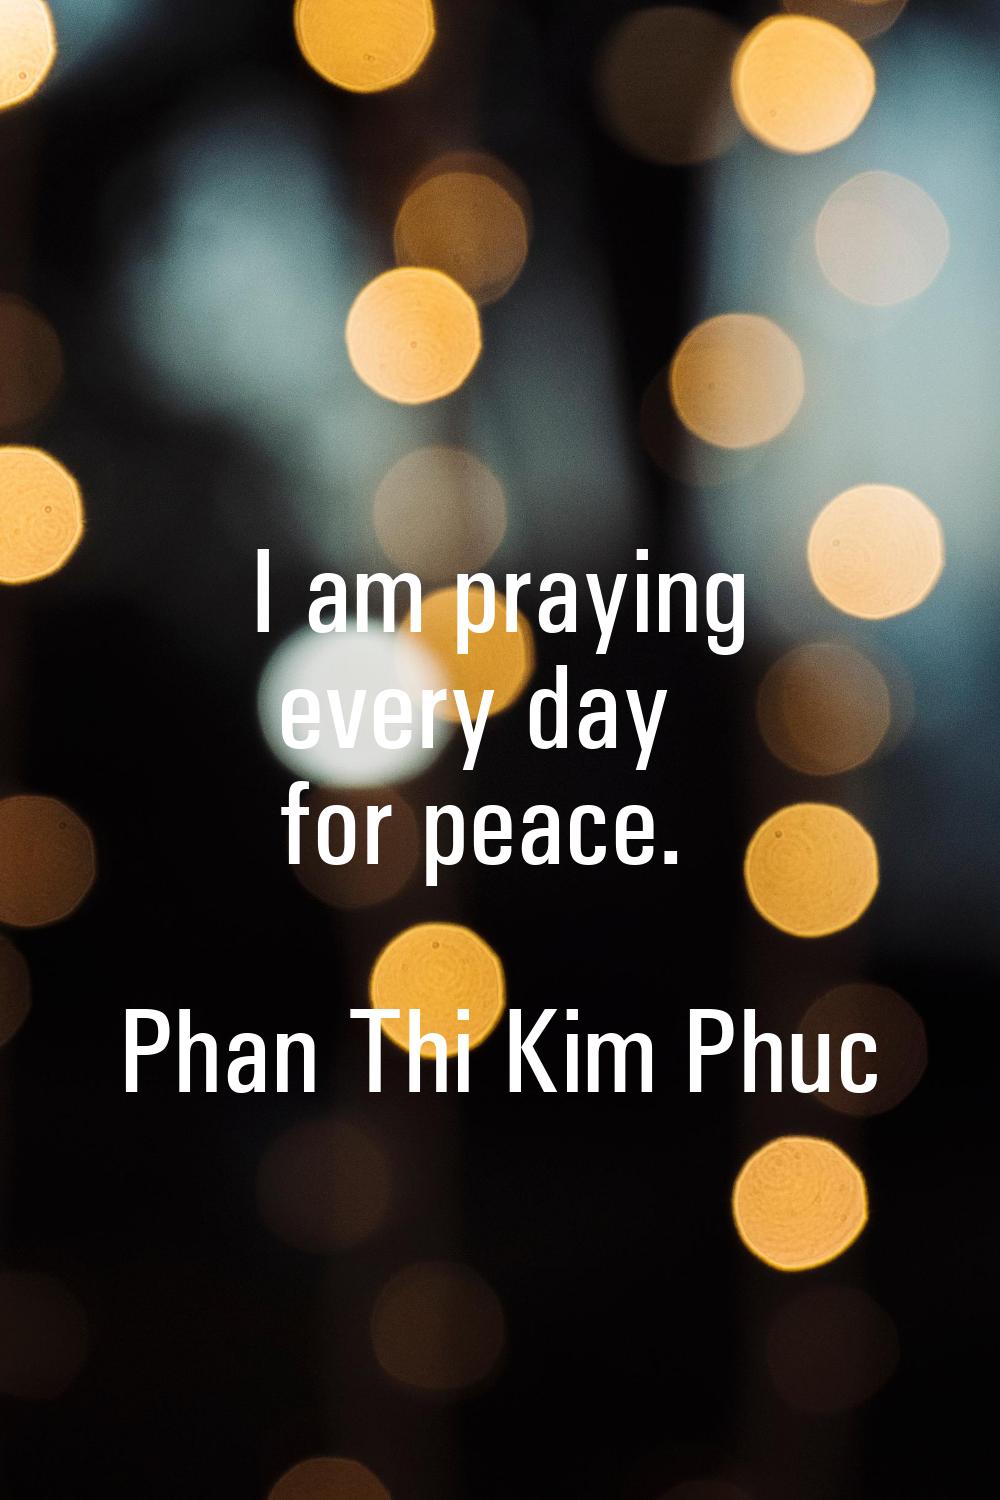 I am praying every day for peace.